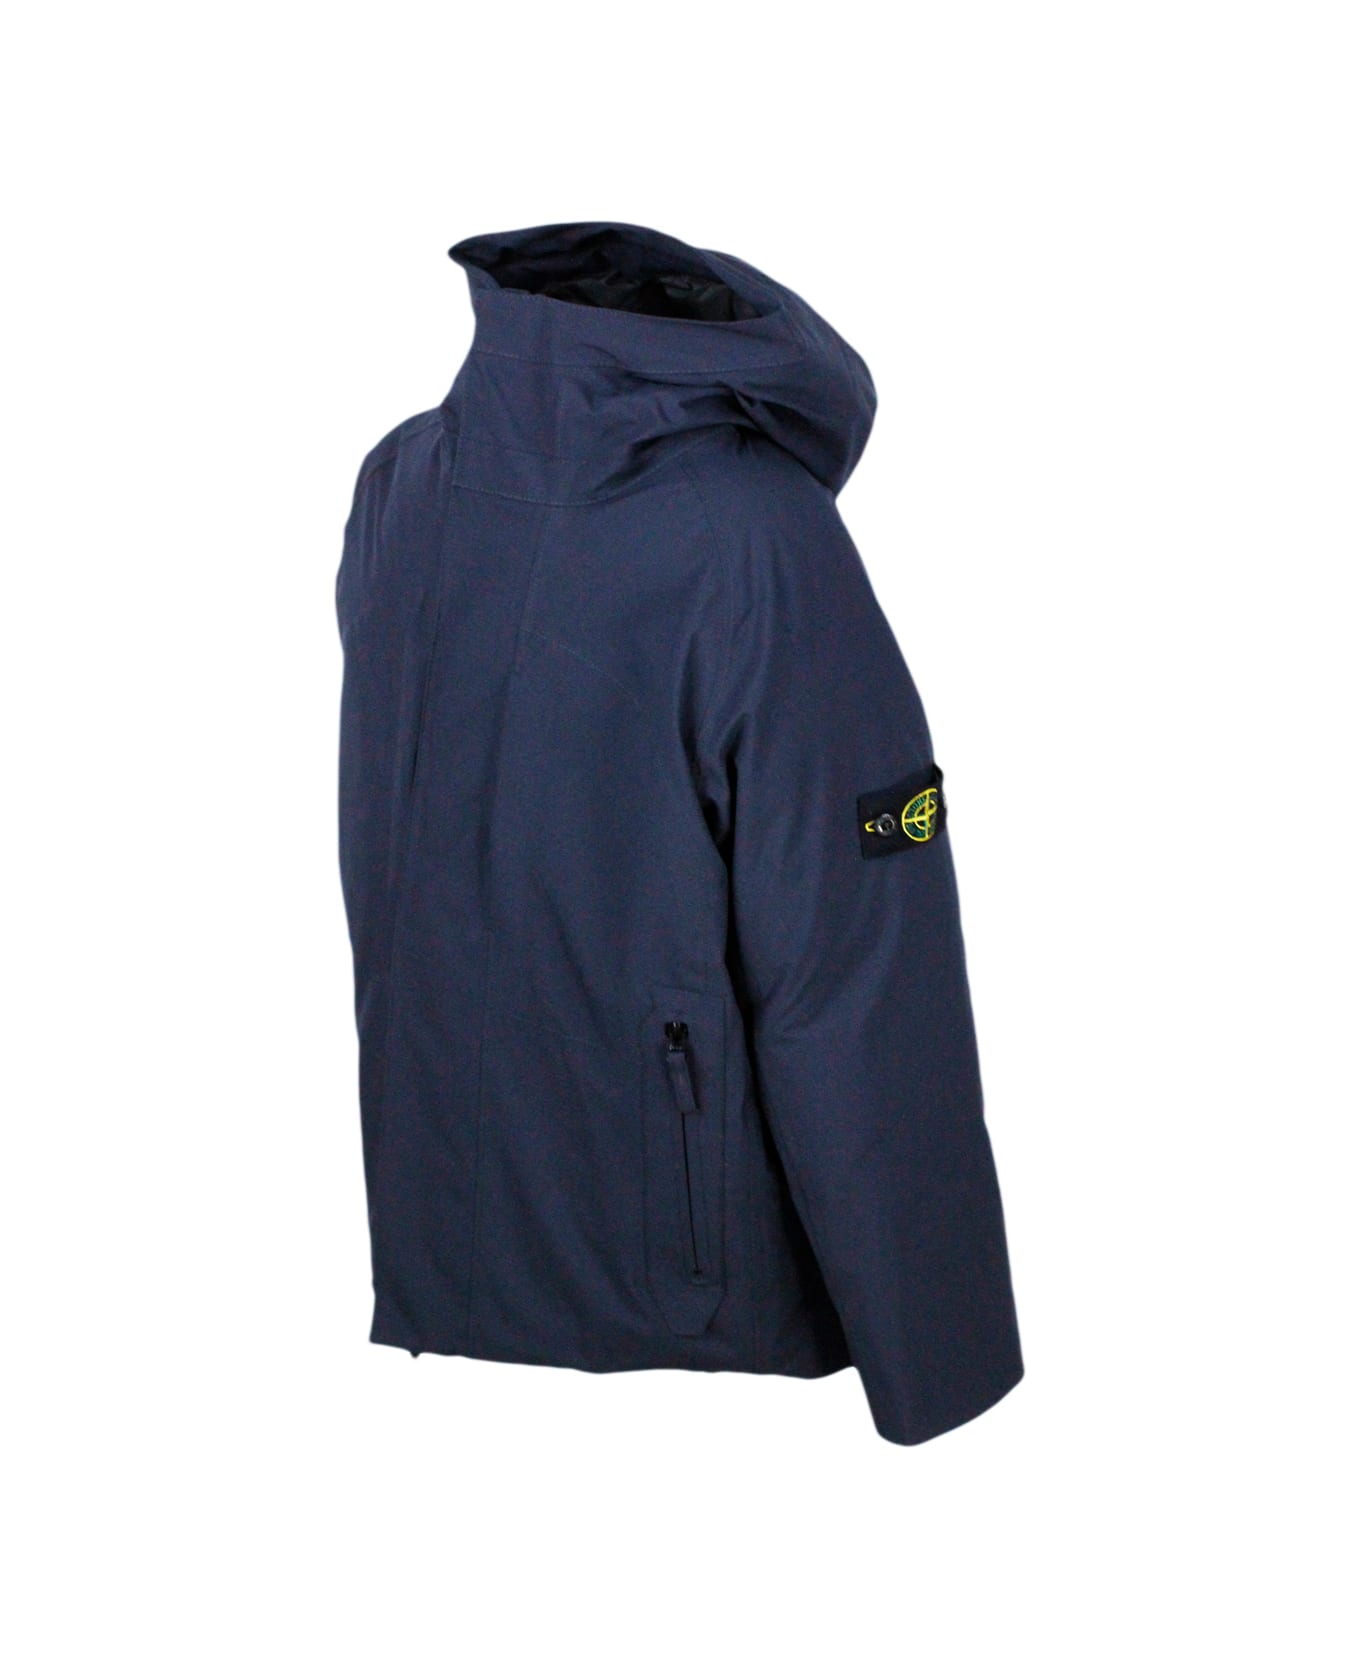 Stone Island Junior Padded Down Jacket With Hood In Technical Fabric Made With Recycled Bottles E.dye Technology With 100% Real Goose Down Padding - Blu